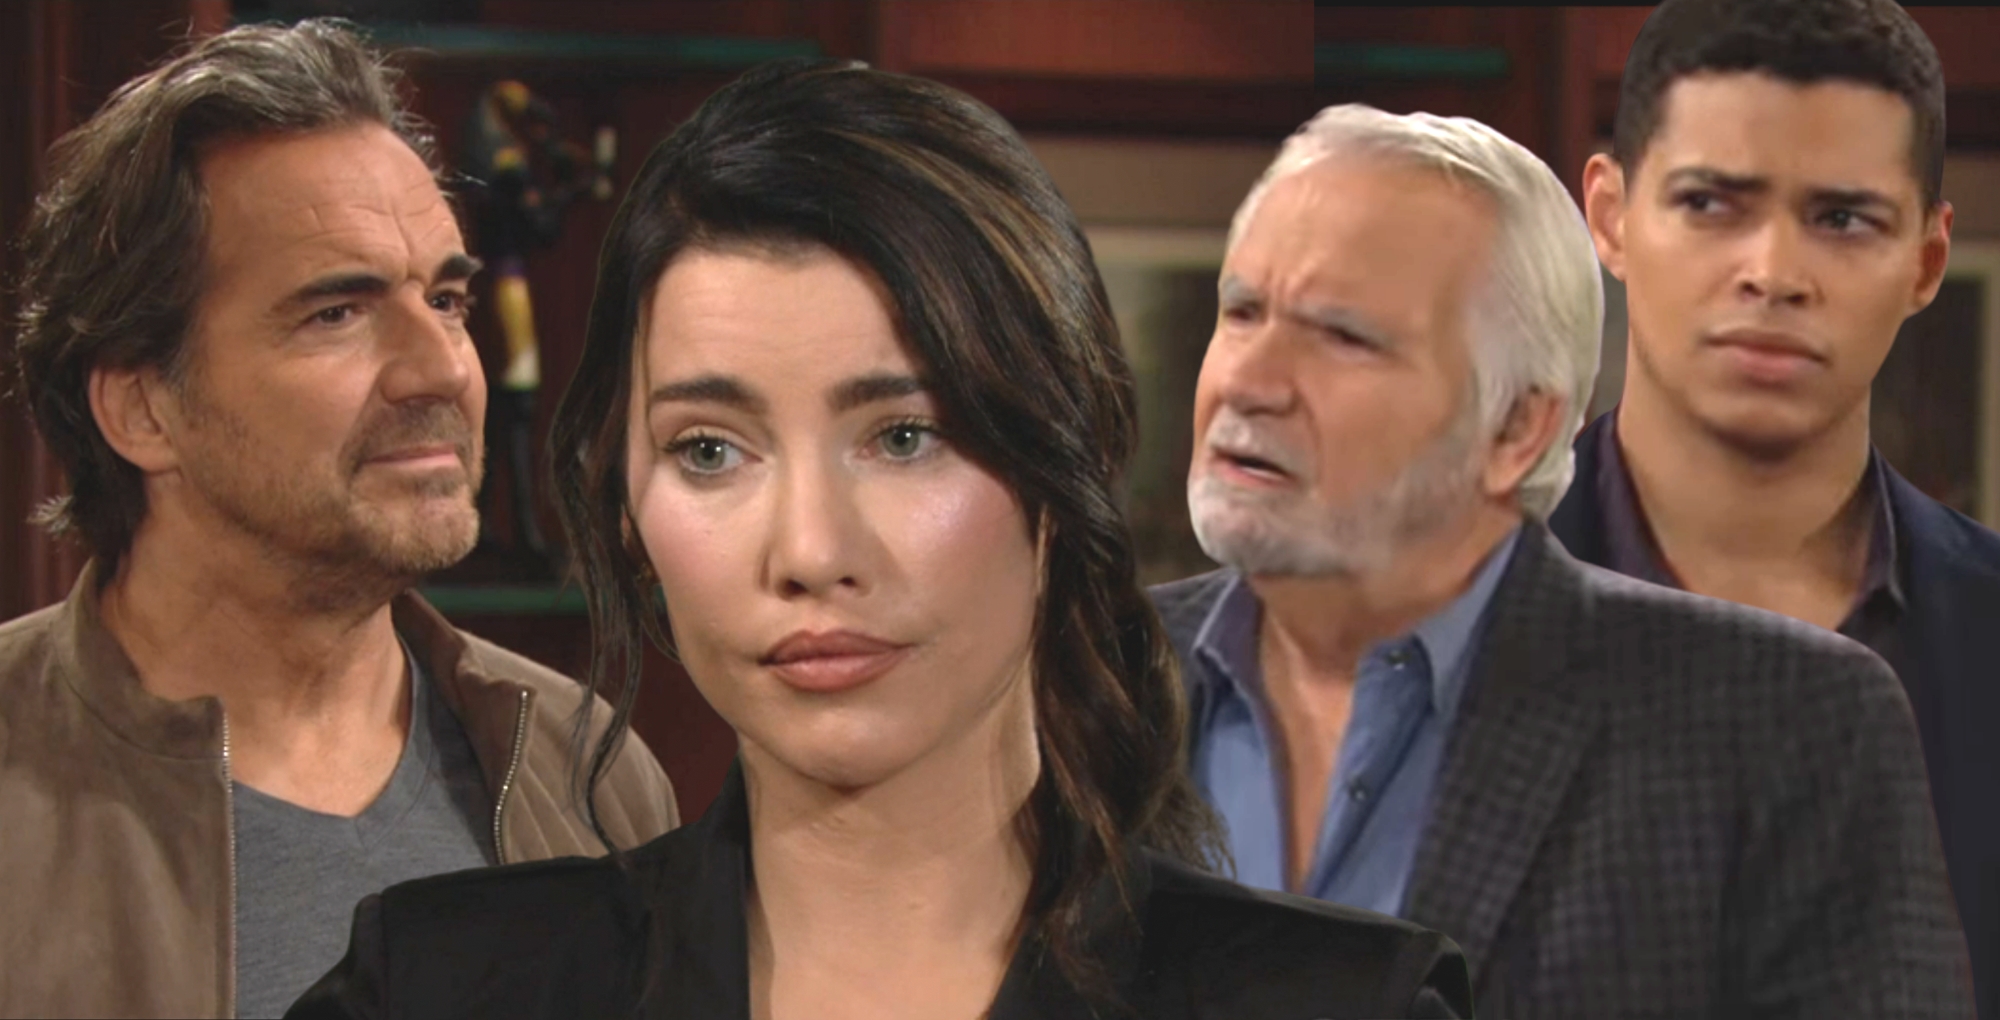 bold and the beautiful characters ridge steffy eric forrester zende forrester dominguez are all backburner for now